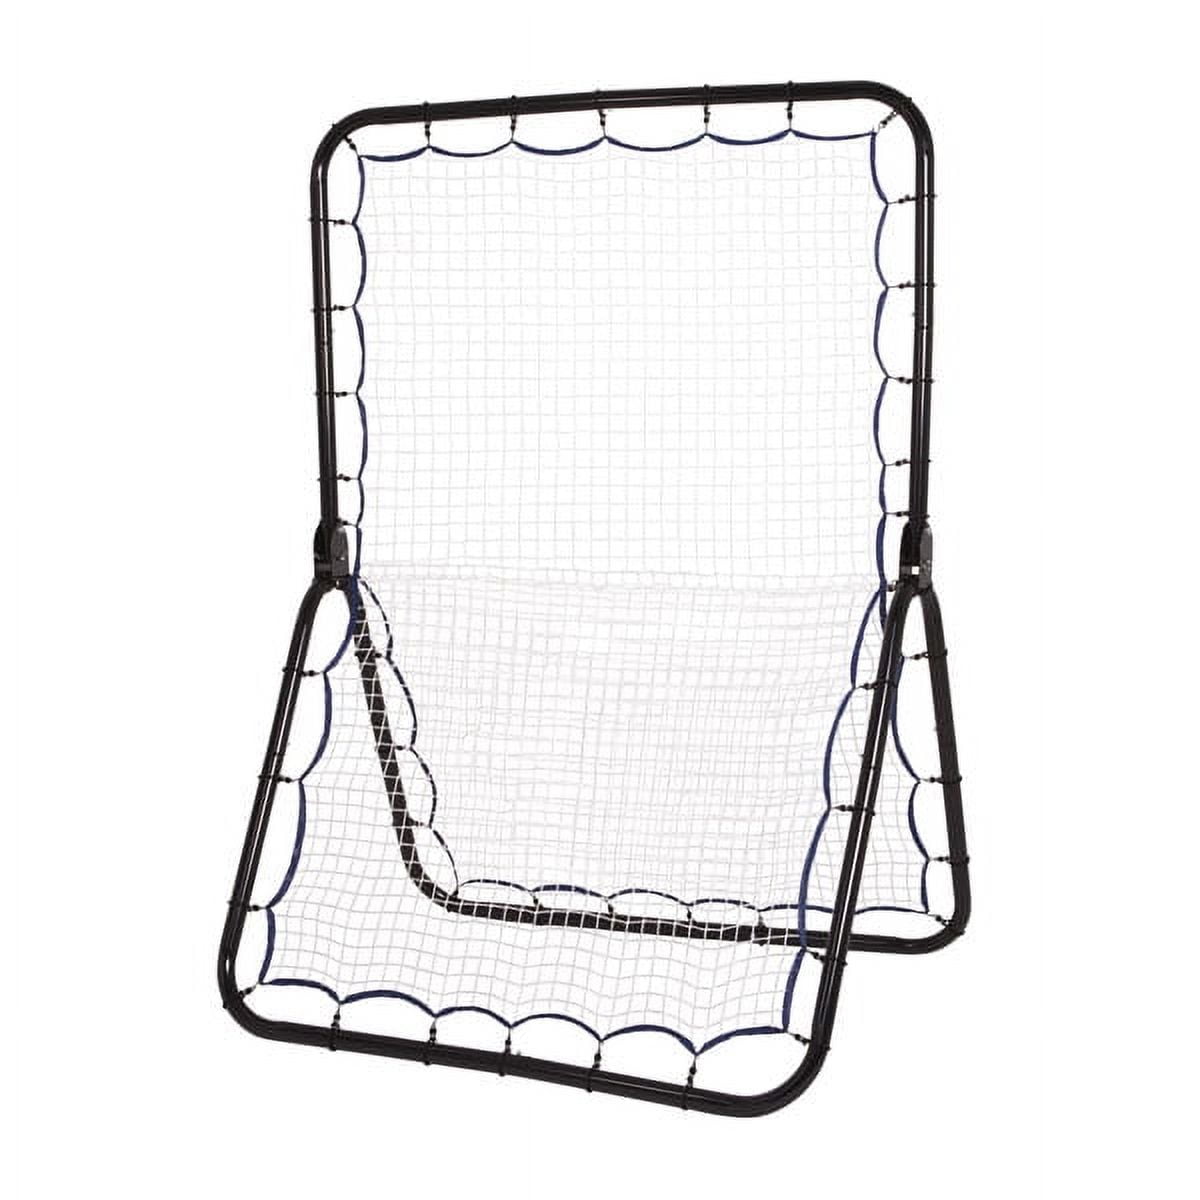 Picture of Champion Sports LBT53 Double-Sided Lacrosse & Multi Sport Training Rebounder